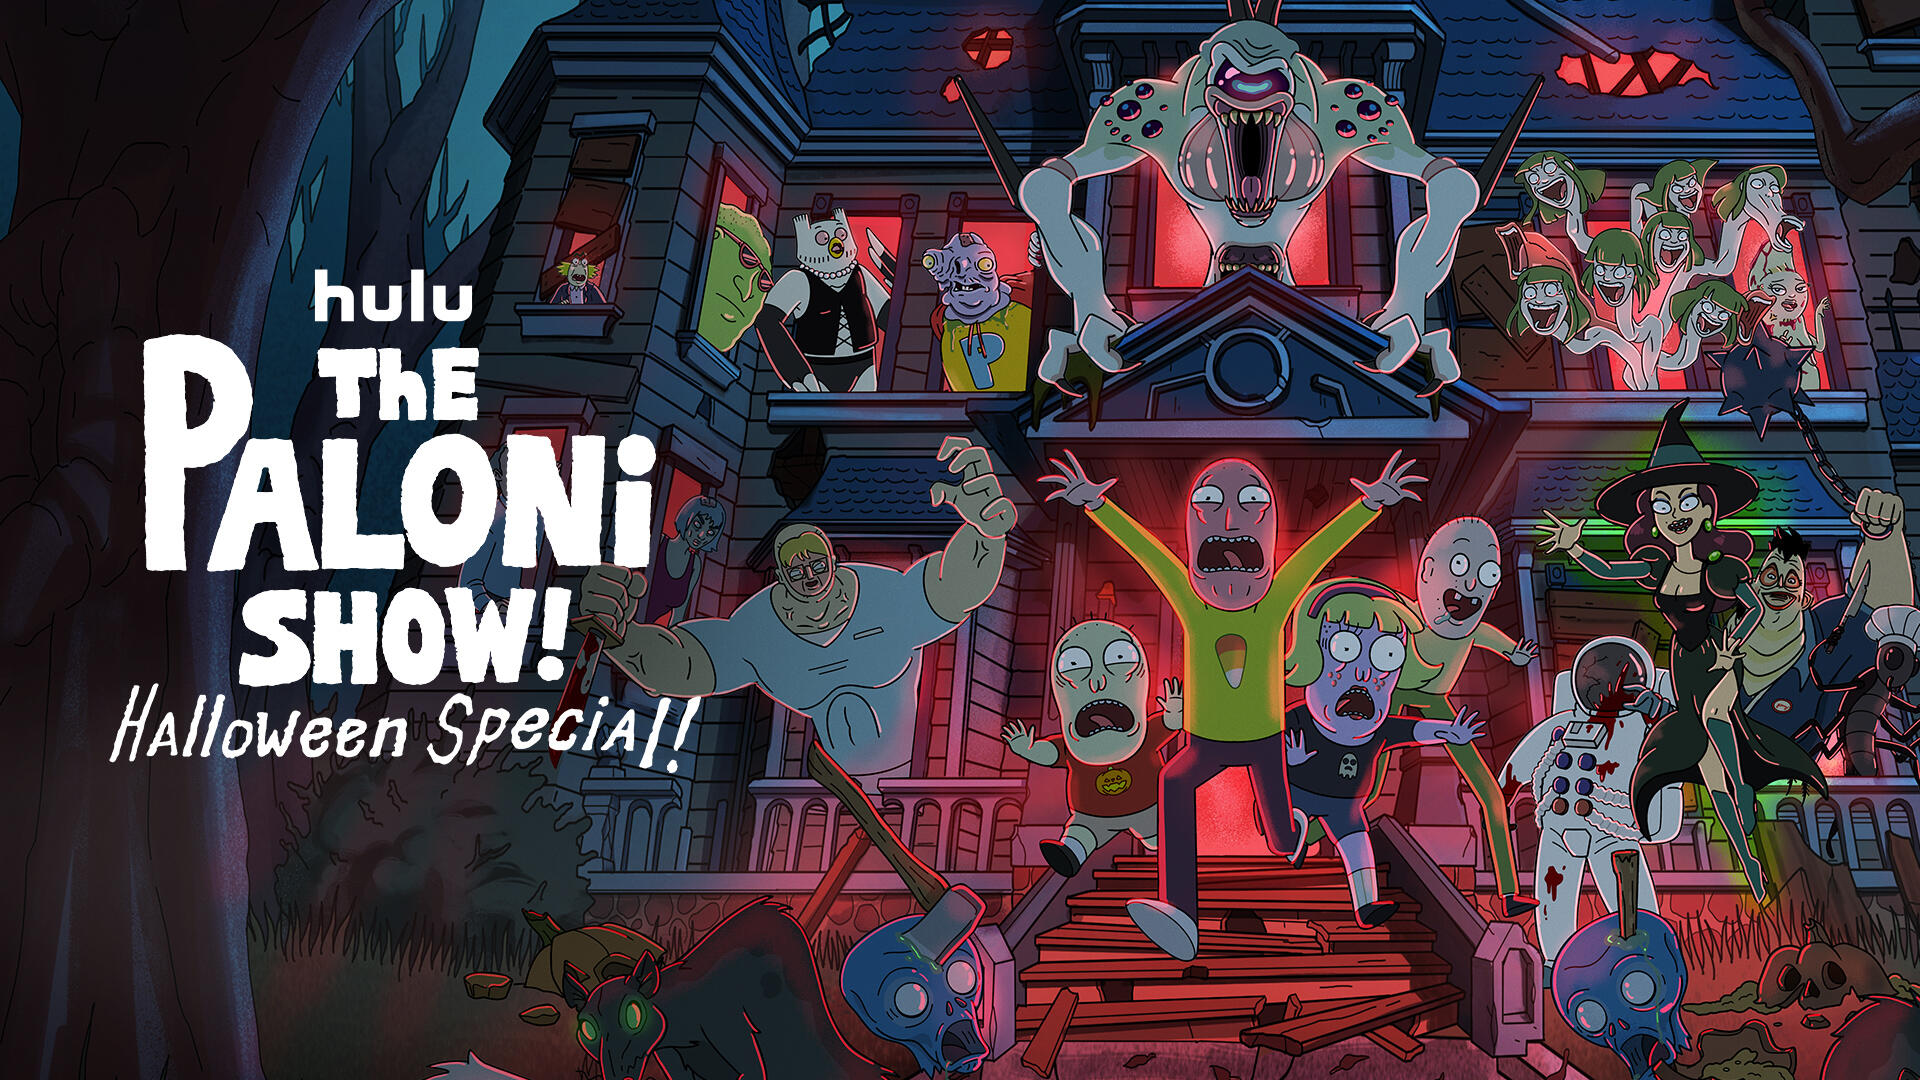 The Paloni Show! Halloween Special -- Season 1 -- From creator Justin Roiland (“Solar Opposites”), “The Paloni Show! Halloween Special!” premieres October 17, 2022 on Hulu. In this special, Leroy, Reggie, and Cheruce Paloni have been given the opportunity of a lifetime to be the hosts of an unforgettable Halloween Special full of “spooky” shorts from a group of up-and-coming animators. “The Paloni Show! Halloween Special!,” executive produced by Roiland and Ben Bayouth, comes from 20th Television Animation. (Courtesy of Hulu)